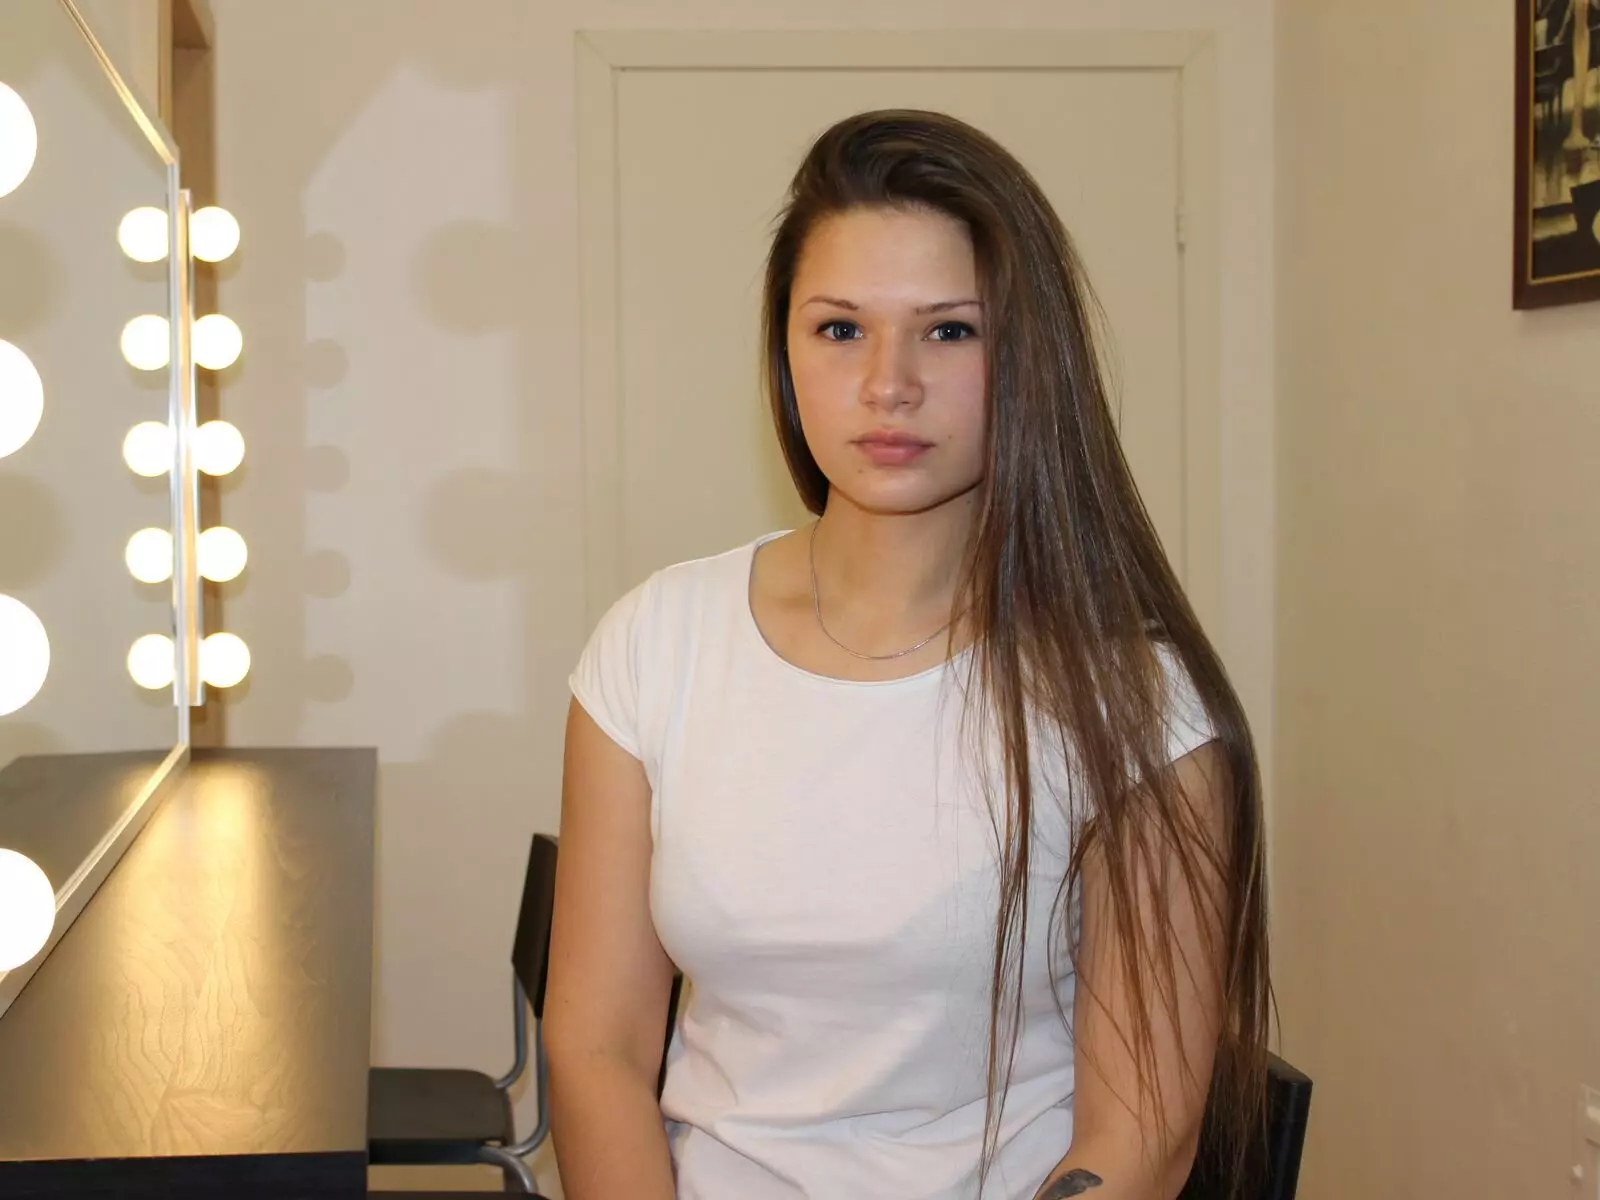 RelaxClaire livejasmin